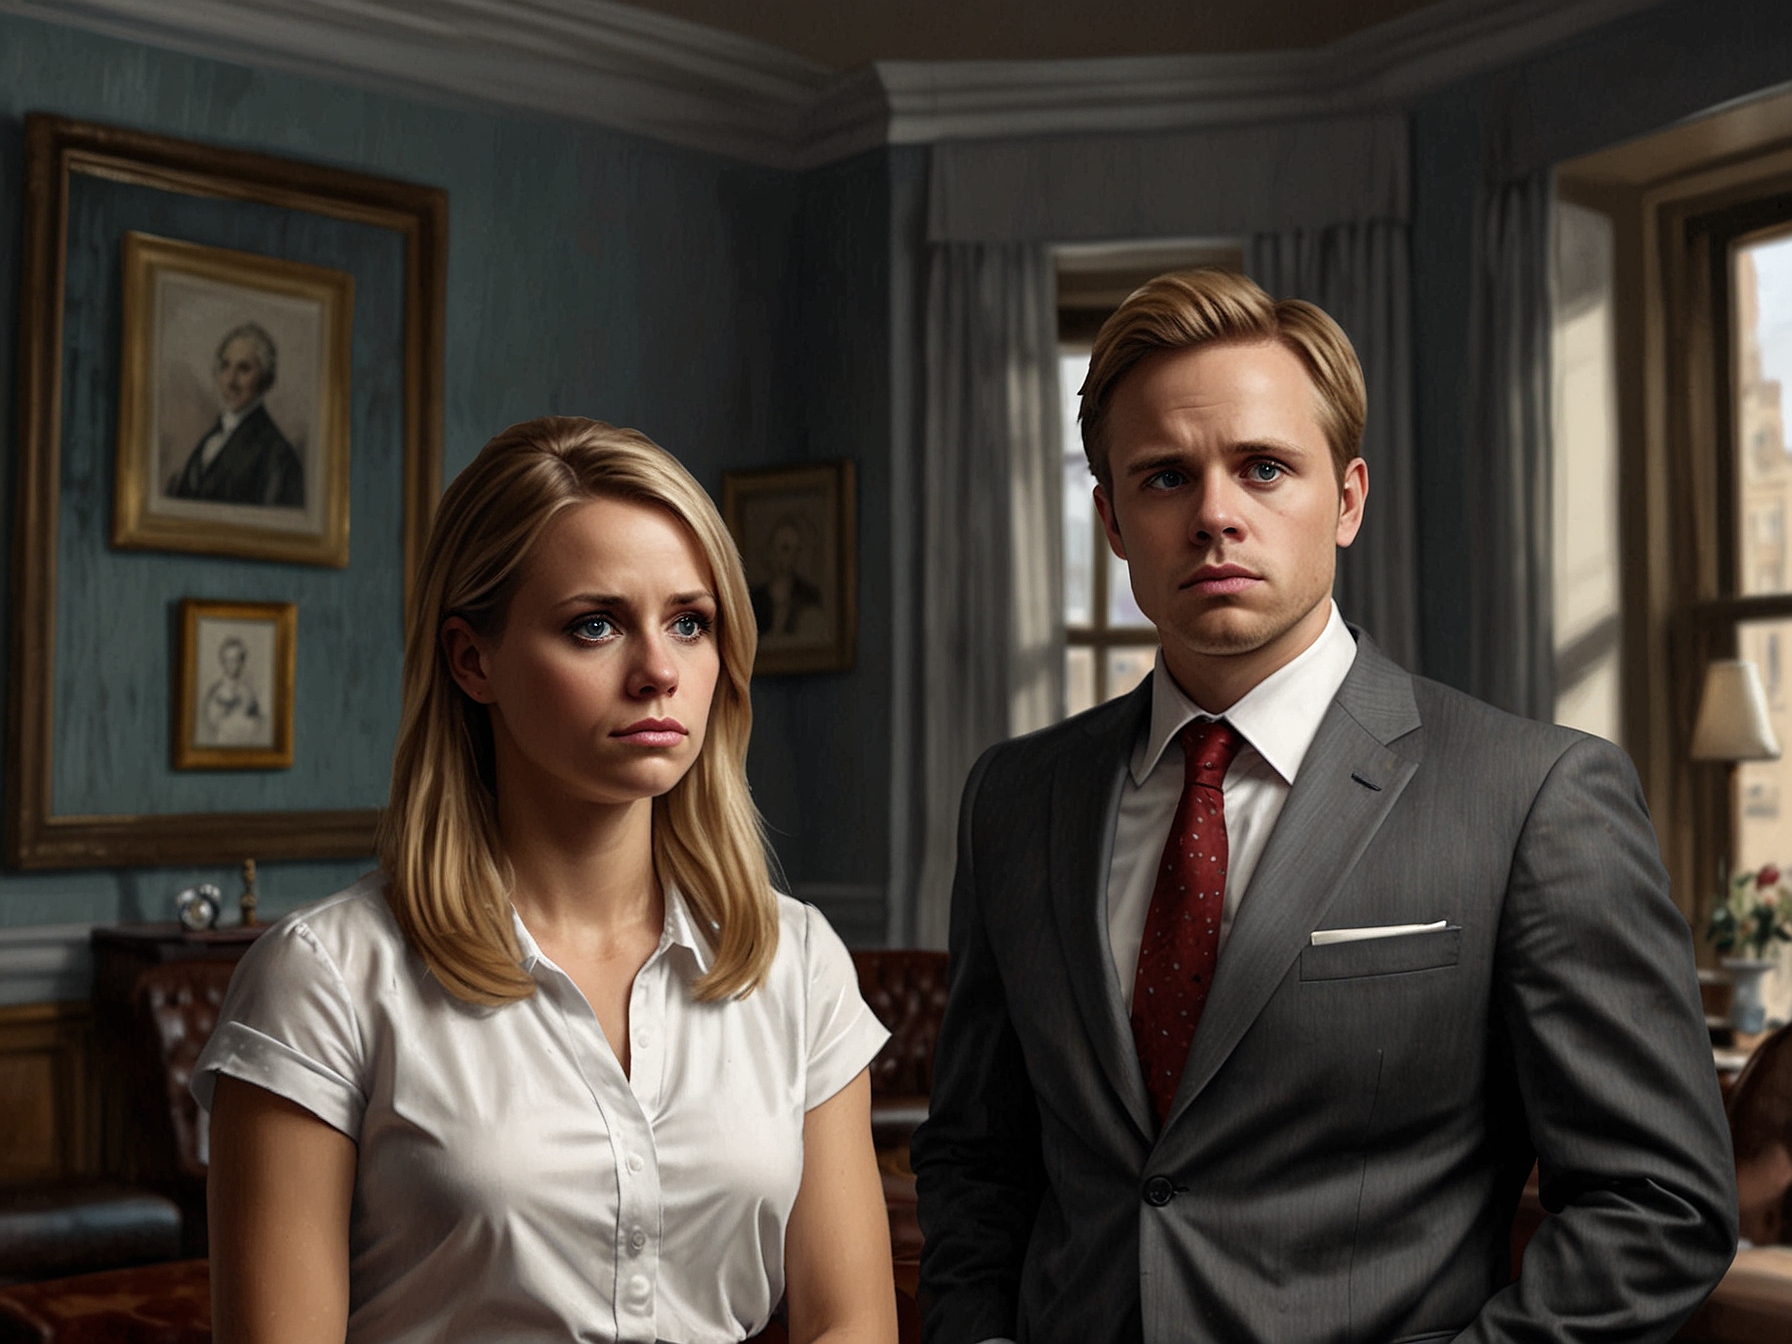 David and Sarah Platt are seen in a dramatic moment of despair in the salon, highlighting their financial troubles and personal struggles that threaten to tear the family apart.